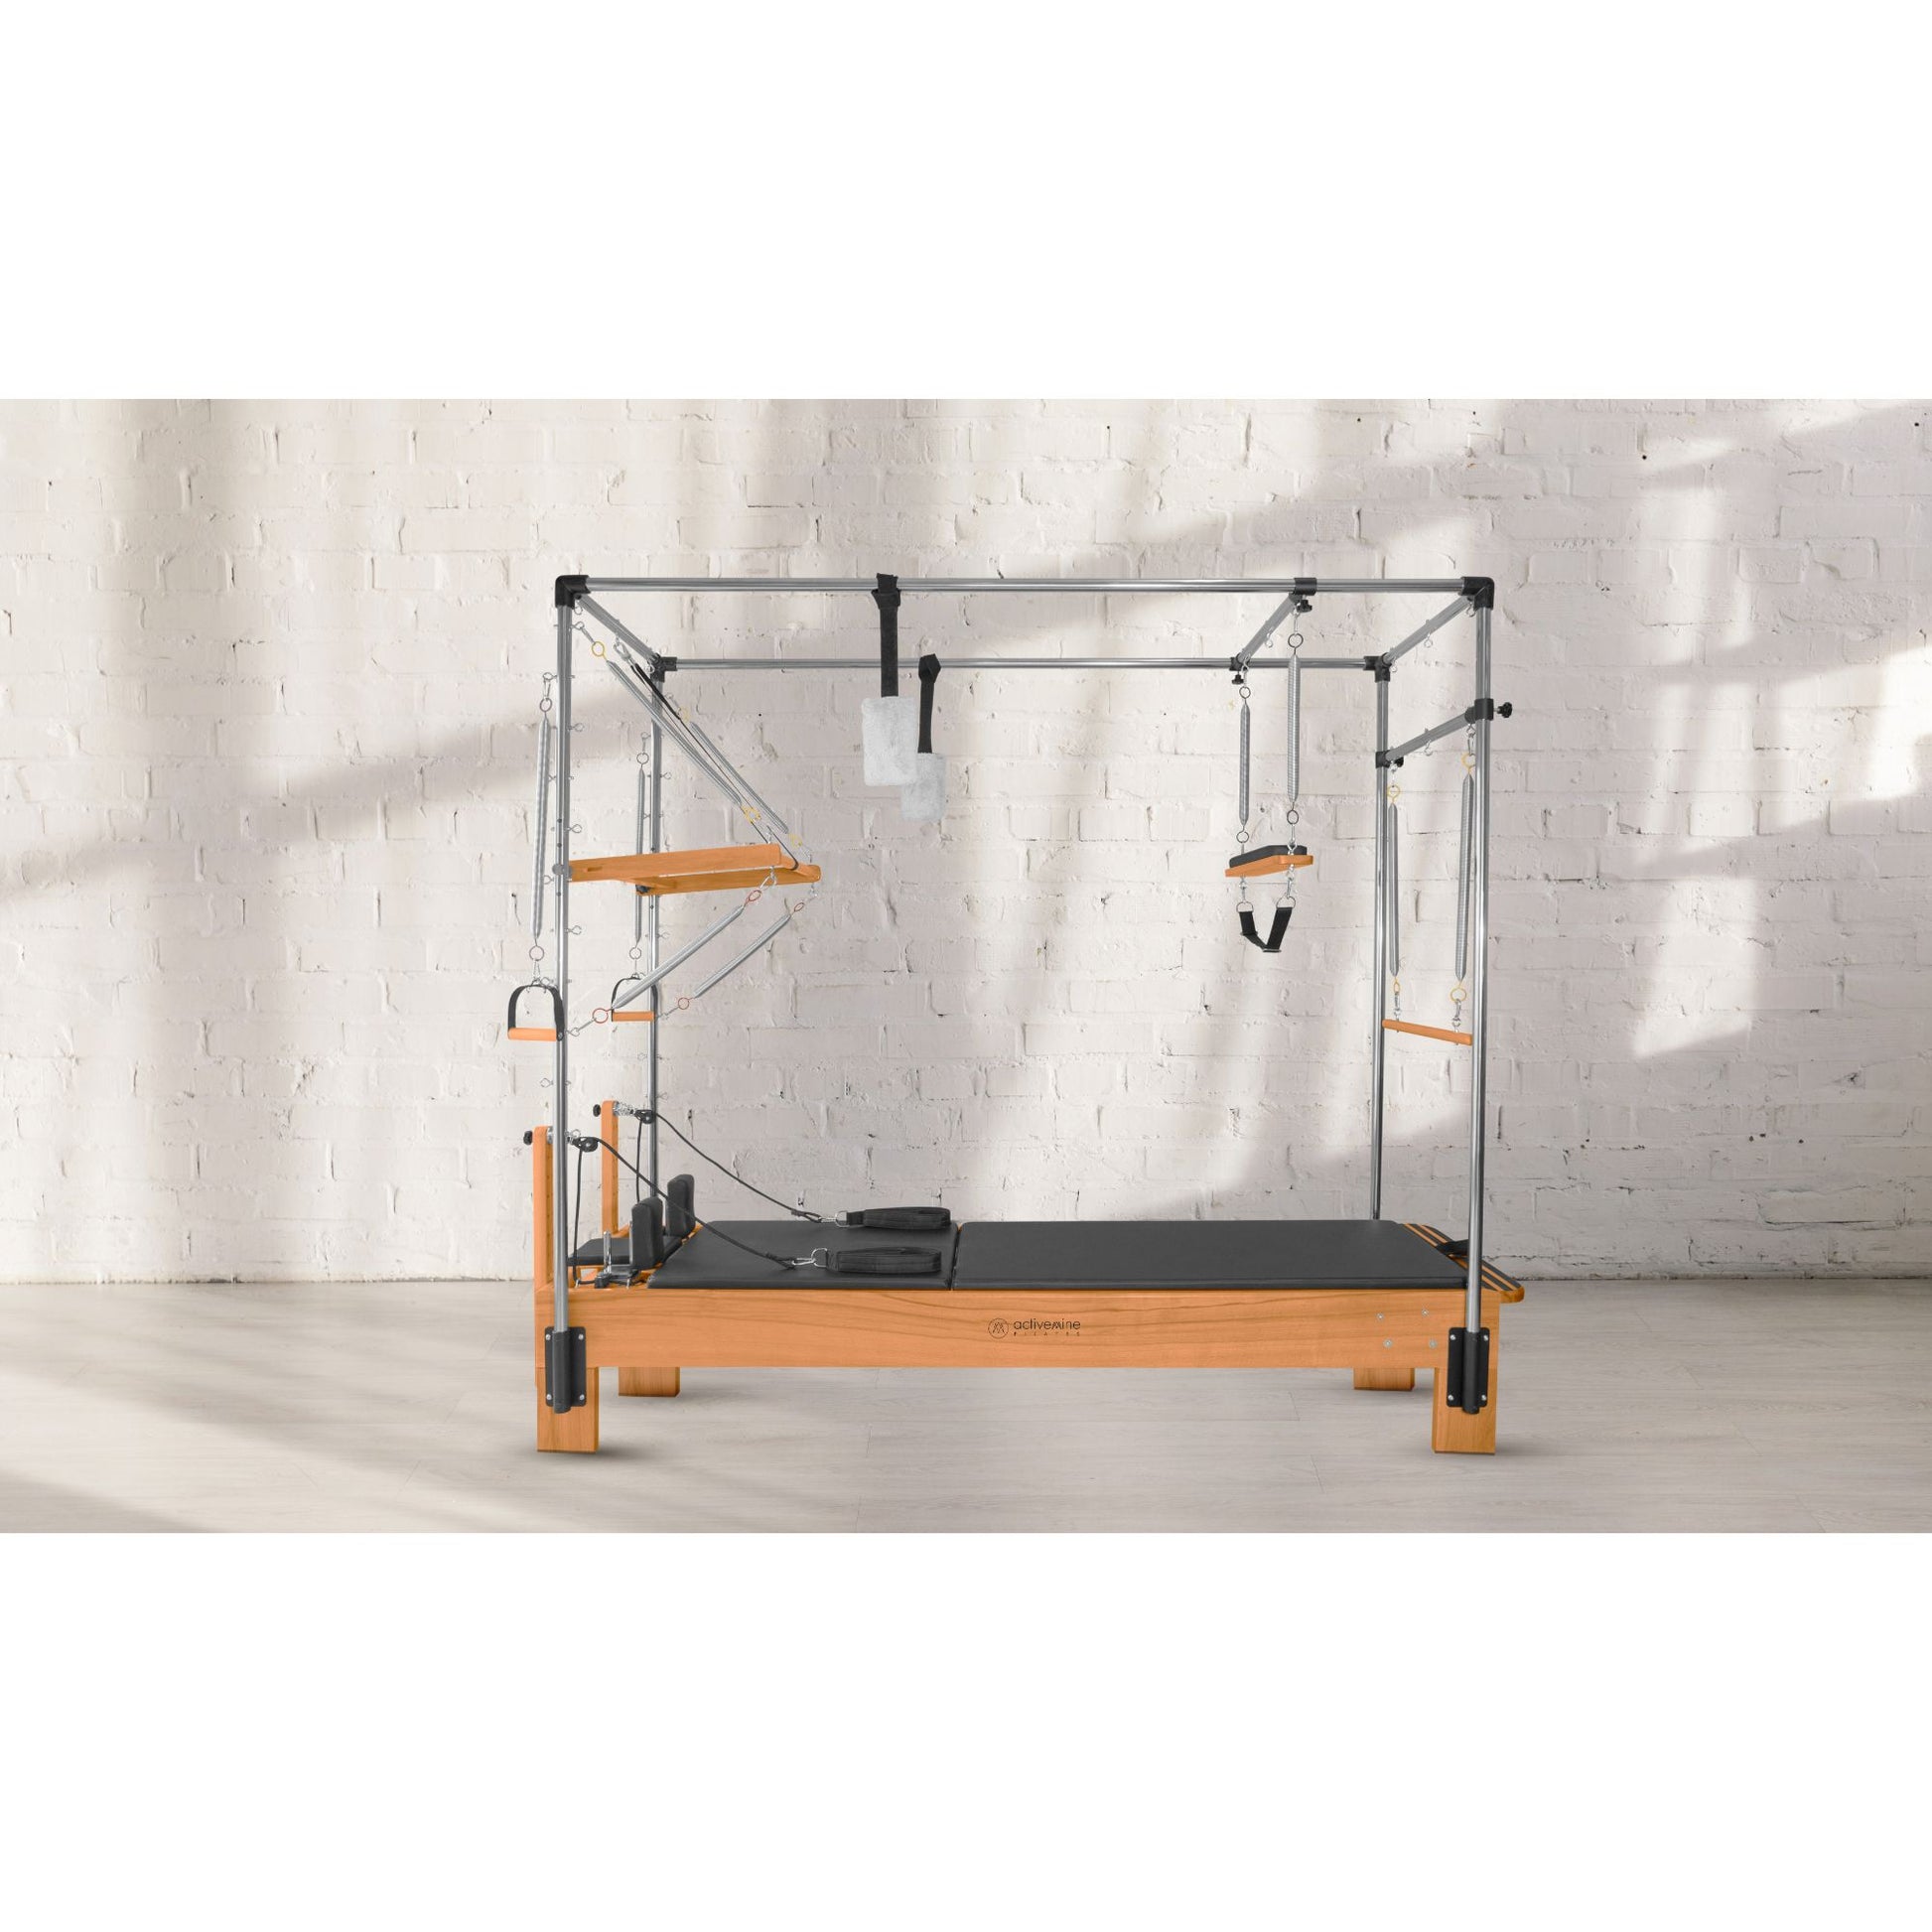 Buy Activemine Pilates Cadillac Reformer with Free Shipping